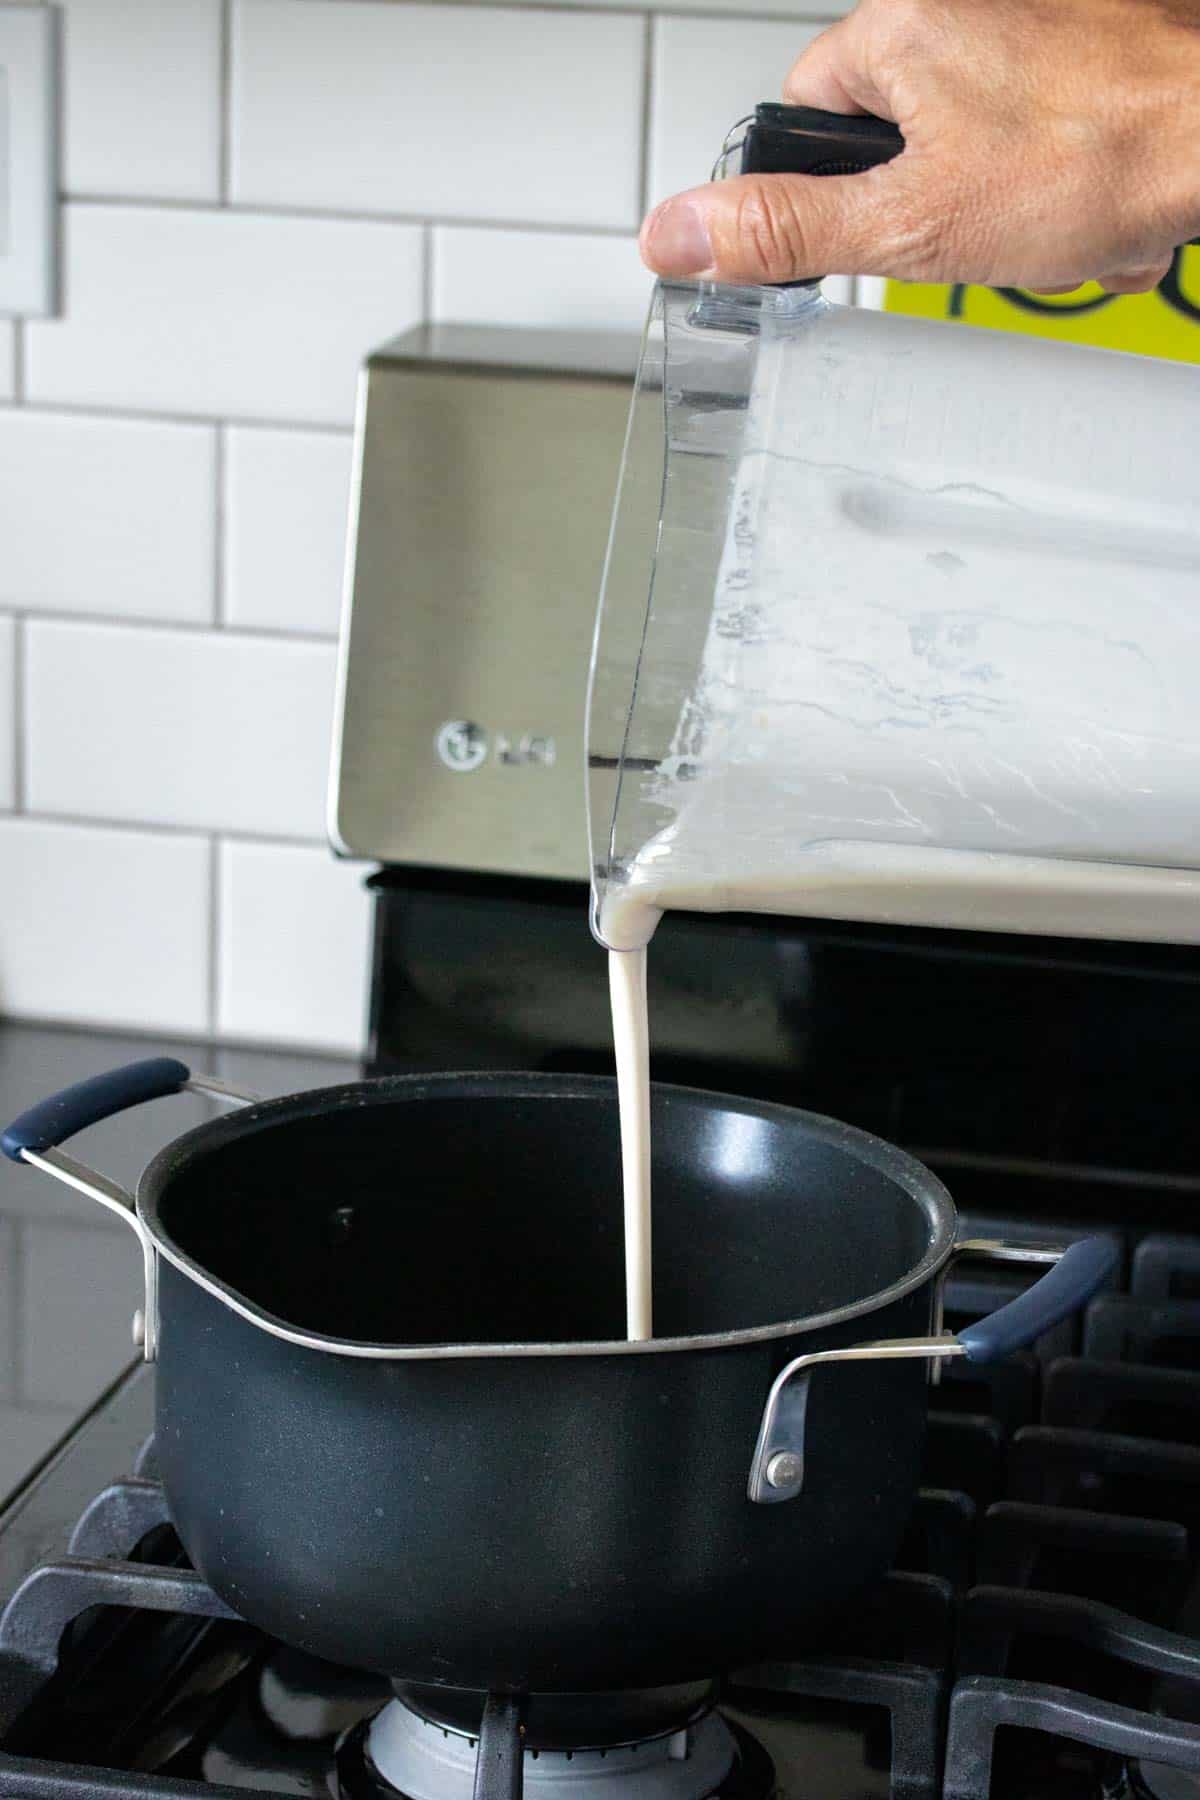 A hand pouring white liquid from a blender into a black pot on the stove.